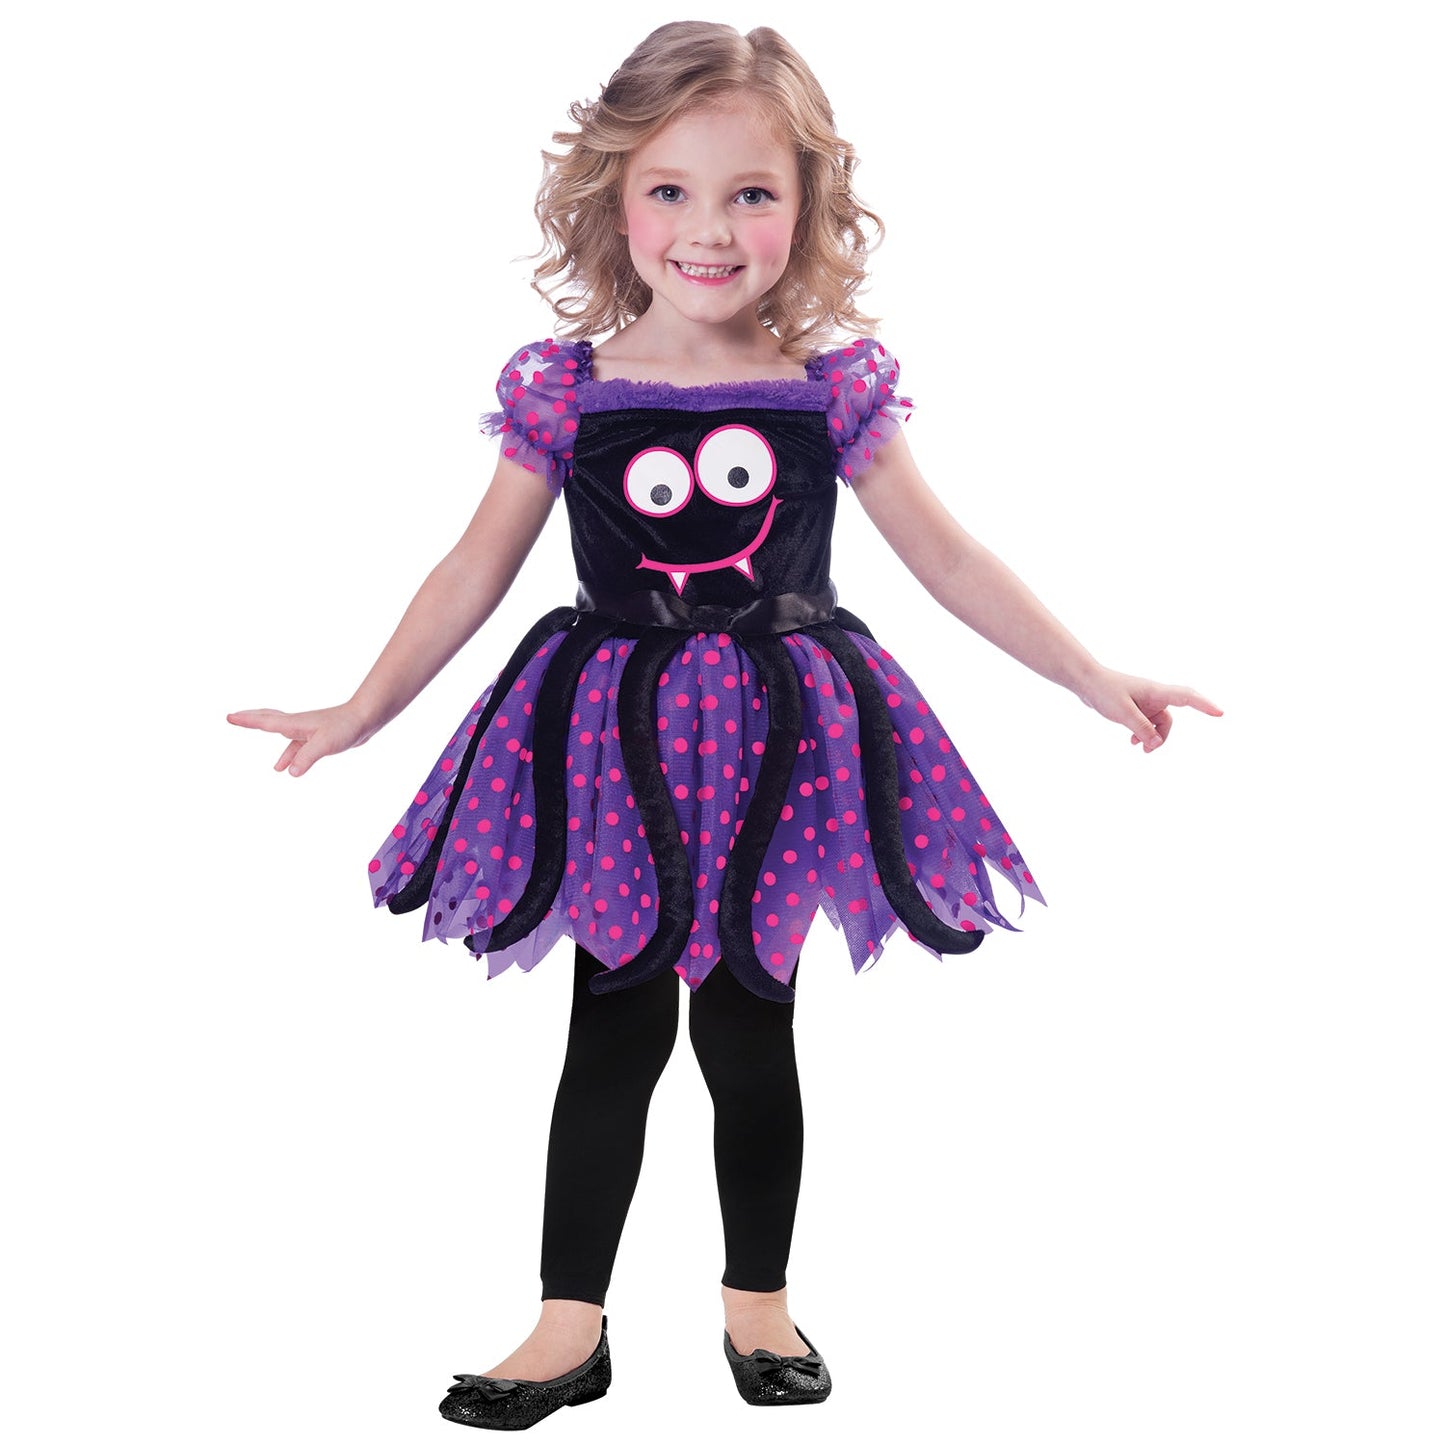 Girls Cute Spider Halloween Costume includes dress with attached spider legs